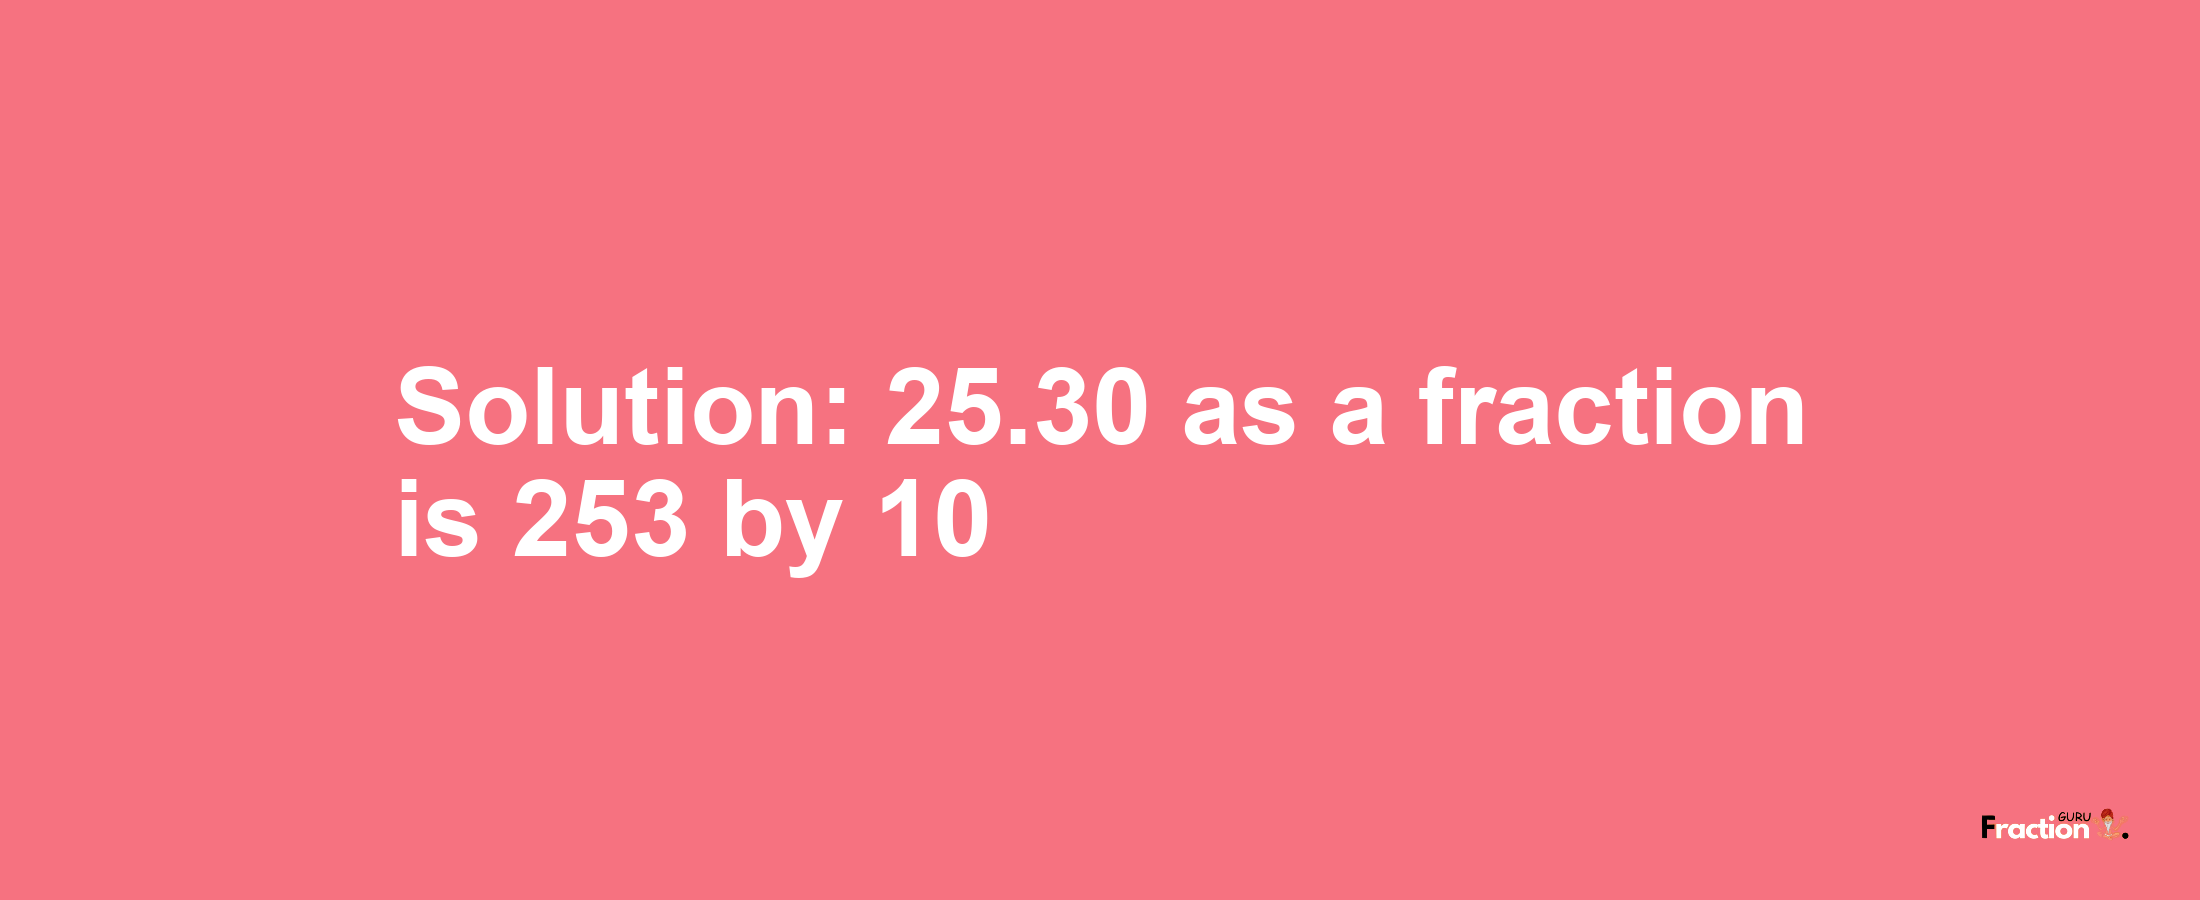 Solution:25.30 as a fraction is 253/10